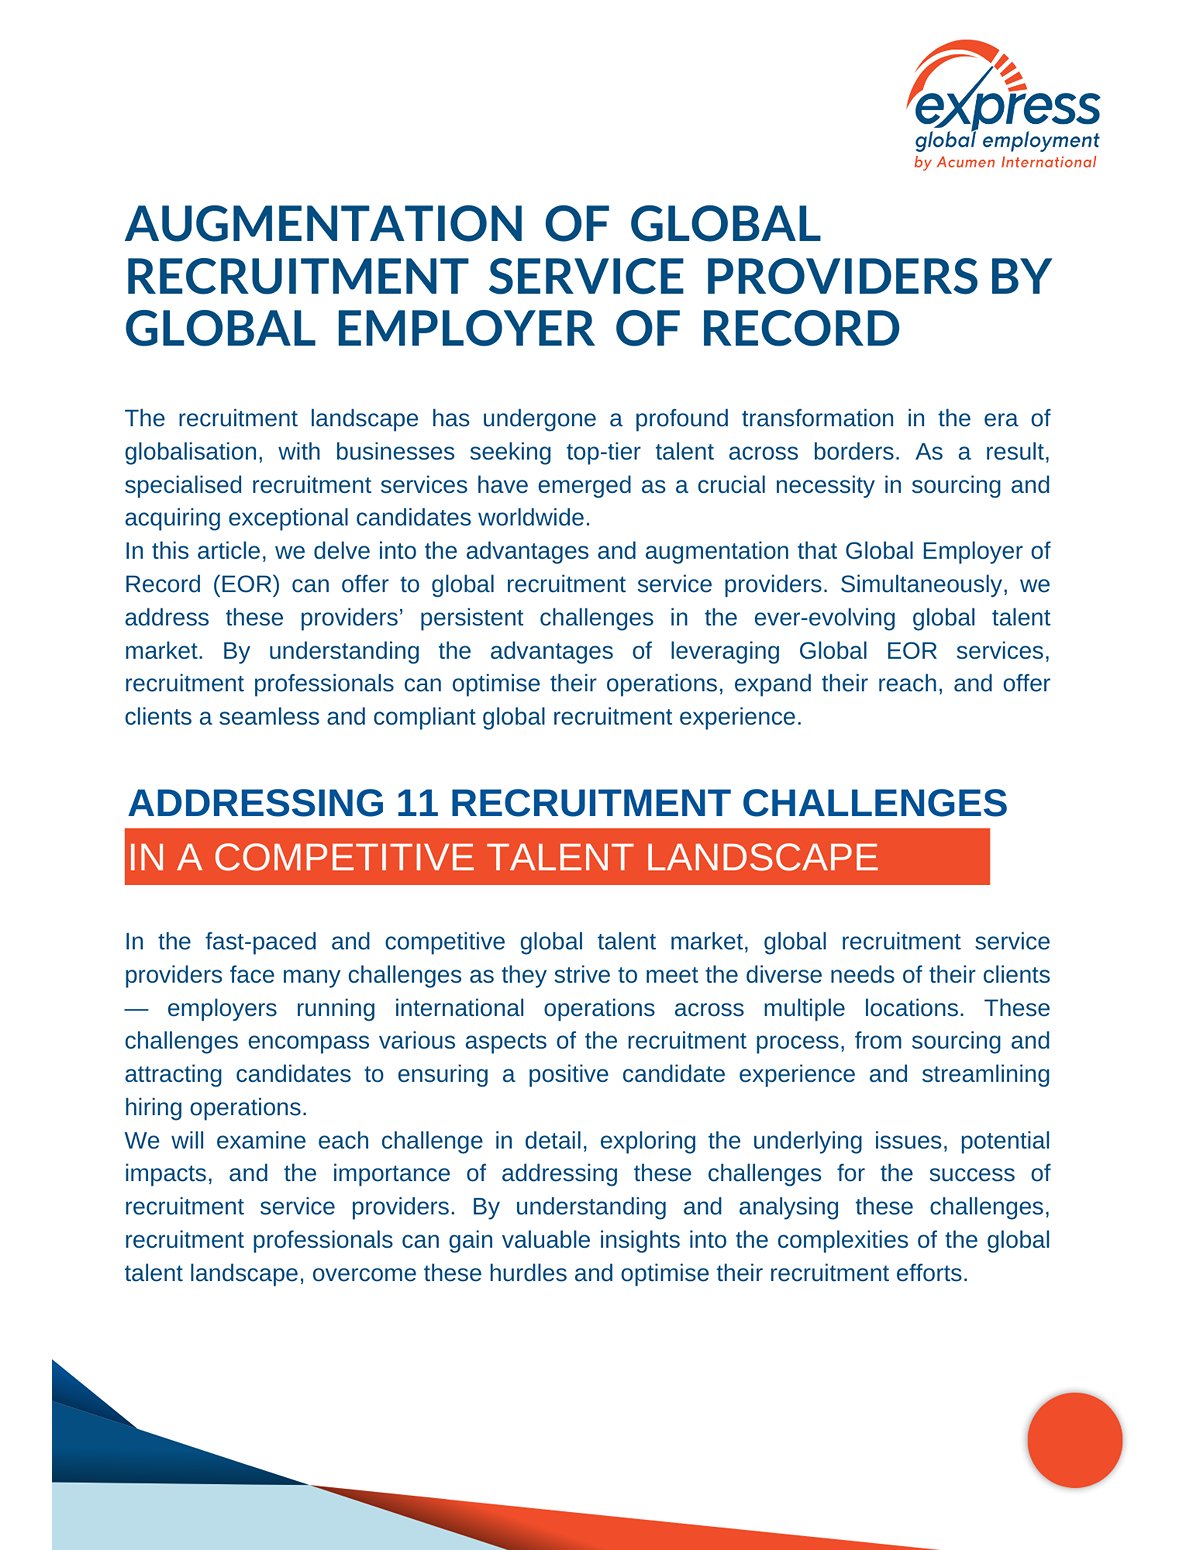 How Global Employer of Record Can Augment Your Global Recruitment Services